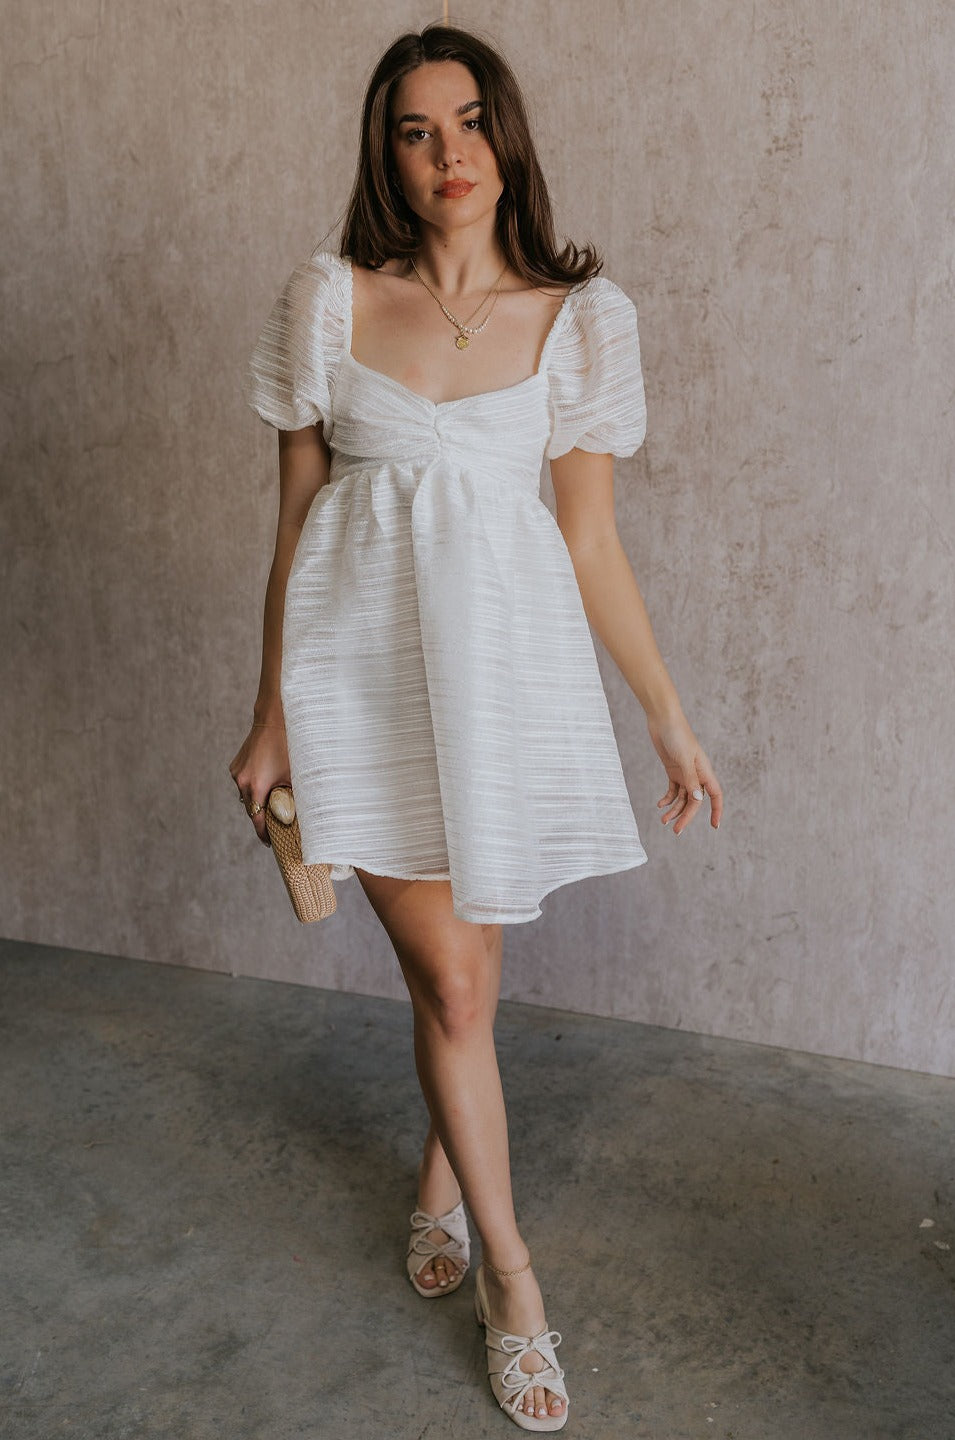 Full body view of female model wearing the Julia Off White Short Puff Sleeve Mini Dress which features Off White Stripe Sheer Fabric, White Lining, Mini Length, Ruched Upper, Sweetheart Neckline, Short Puff Sleeves and Back Cut-Out Detail with Zipper and Tie Closure